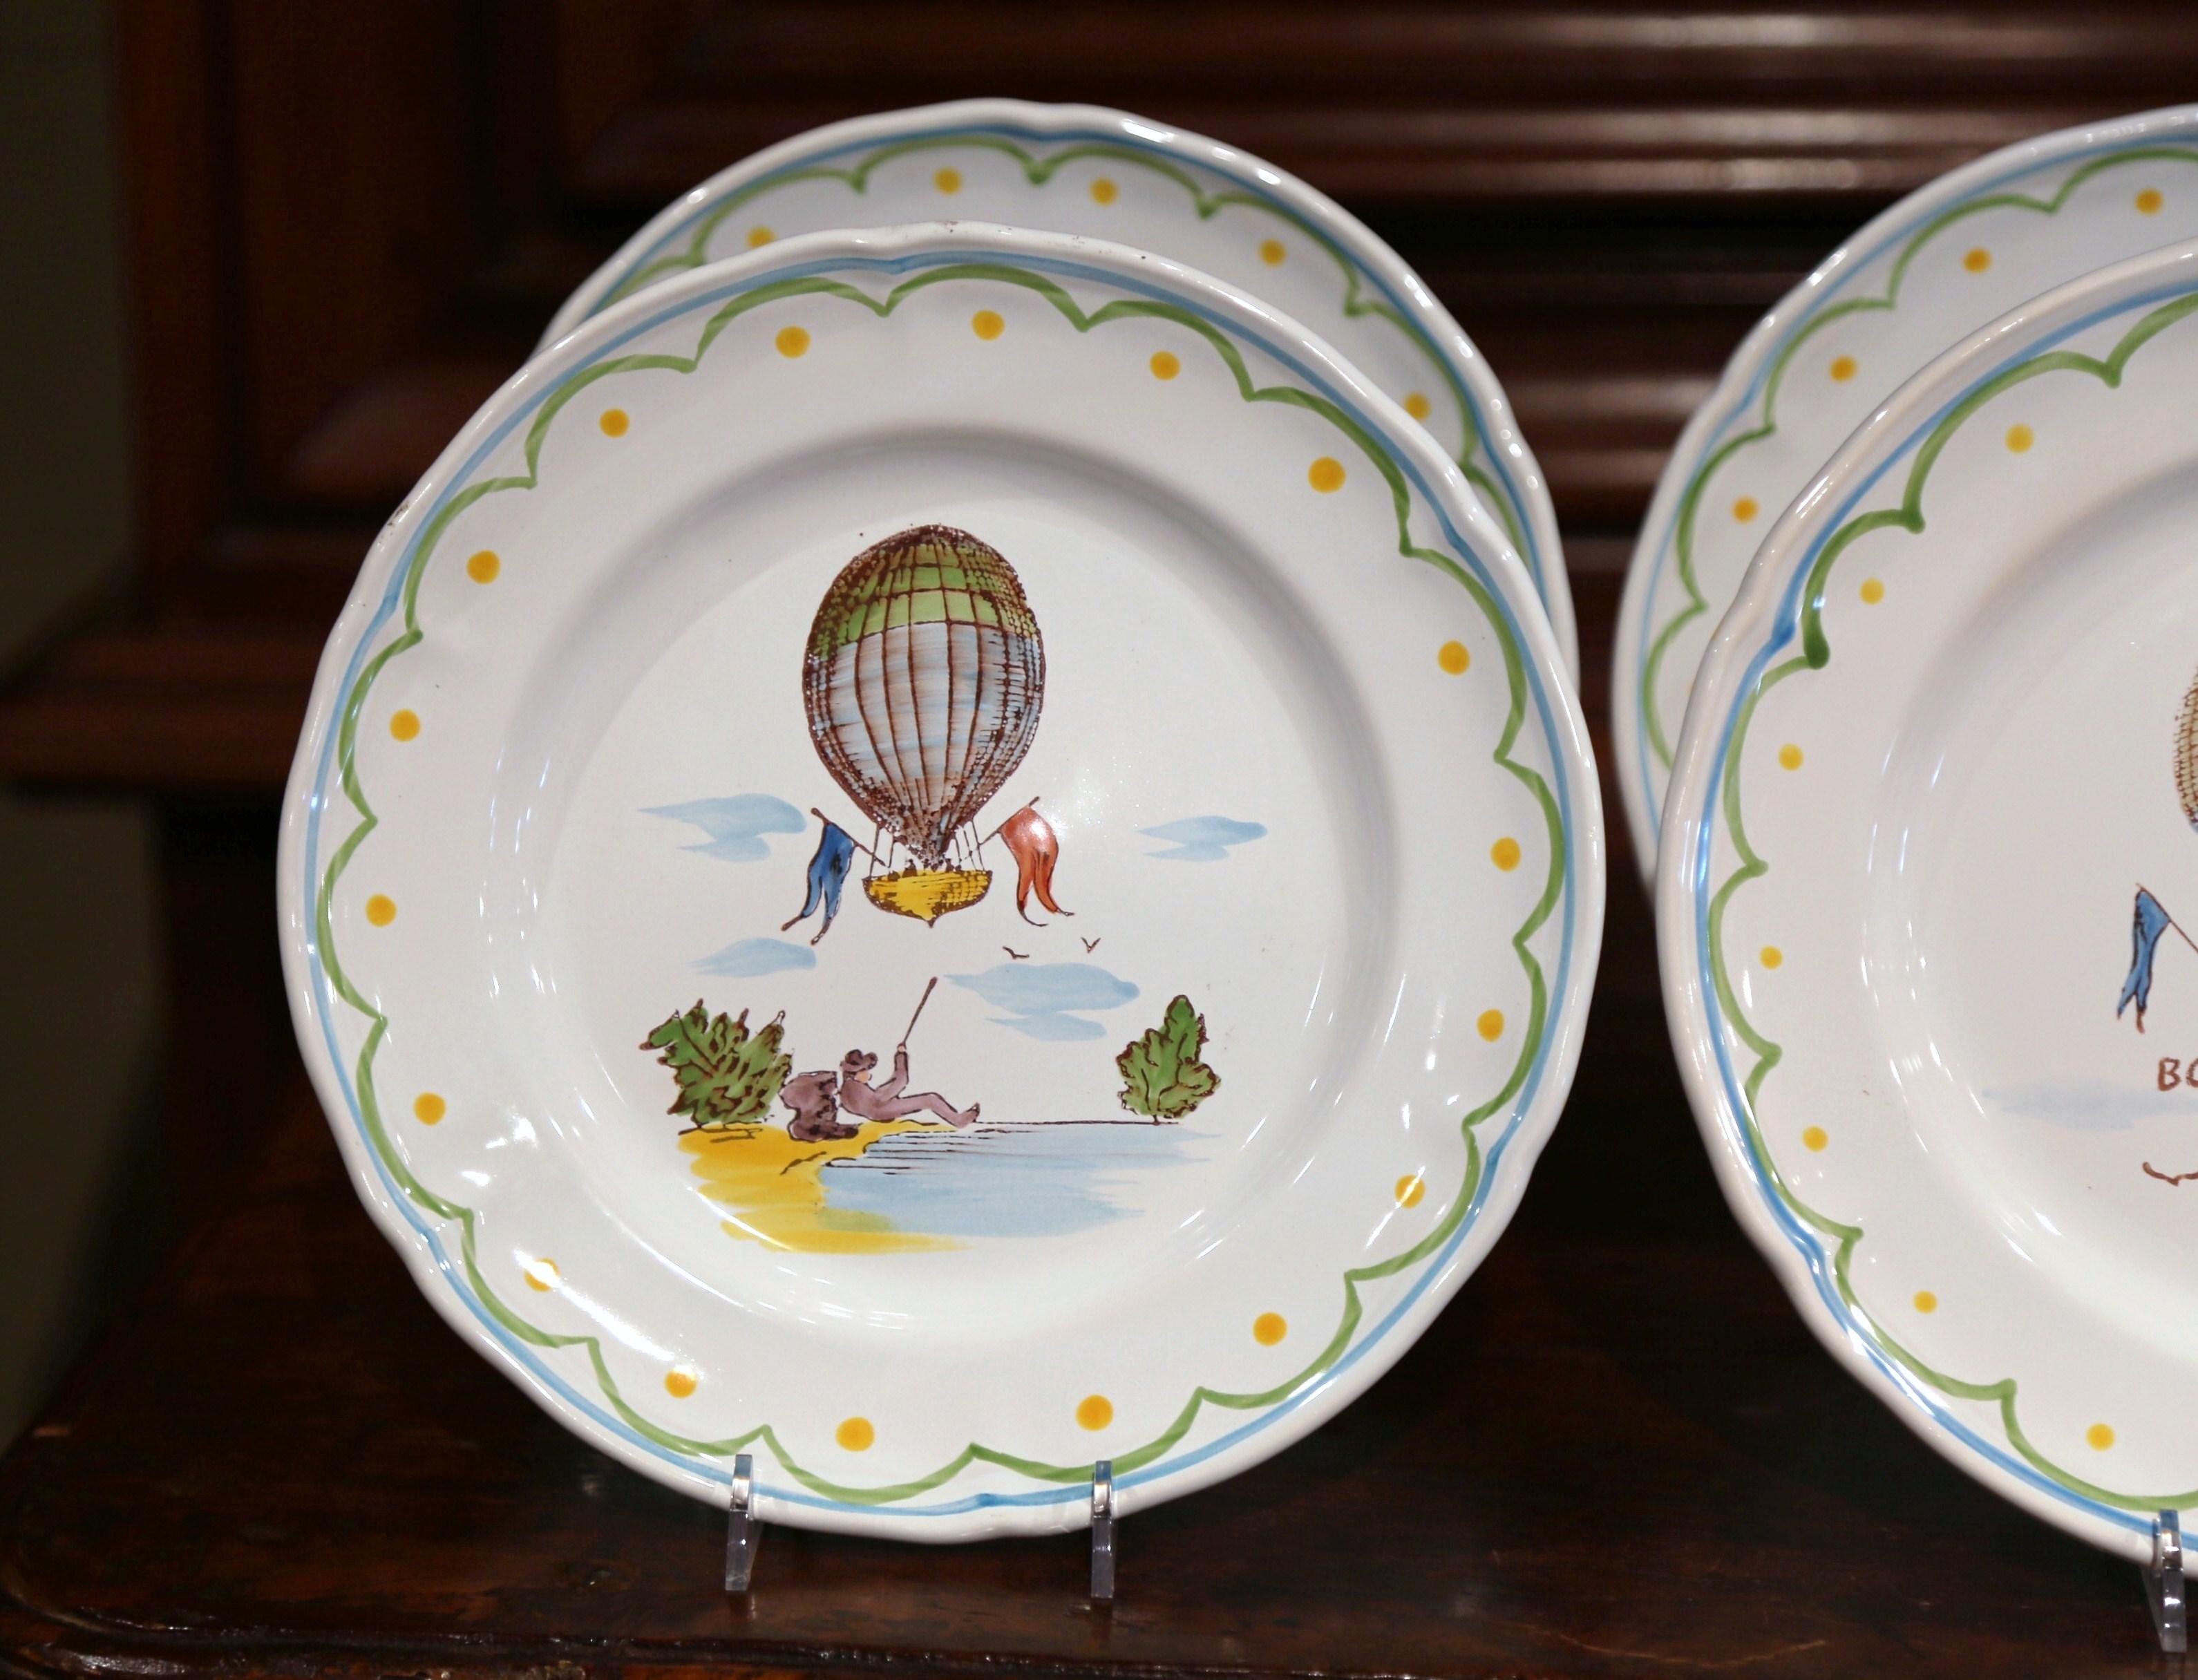 Contemporary Set of Six French Hand-Painted Ceramic Hot Air Balloon Plates from Brittany